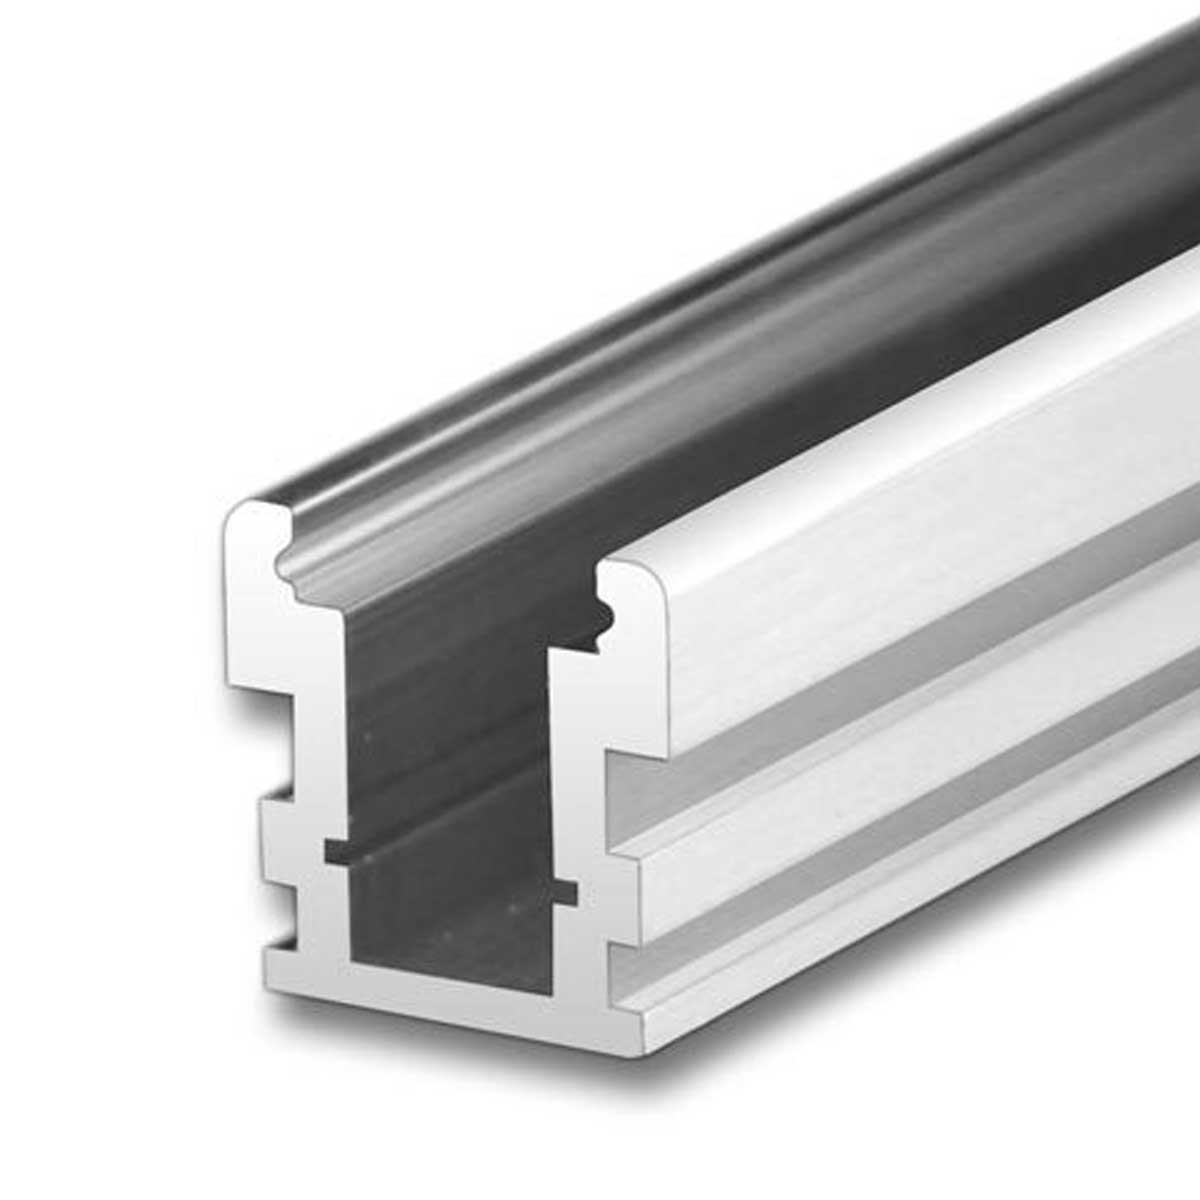 1000 Aluminium Slotted Channel Manufacturers, Suppliers in Kupwara